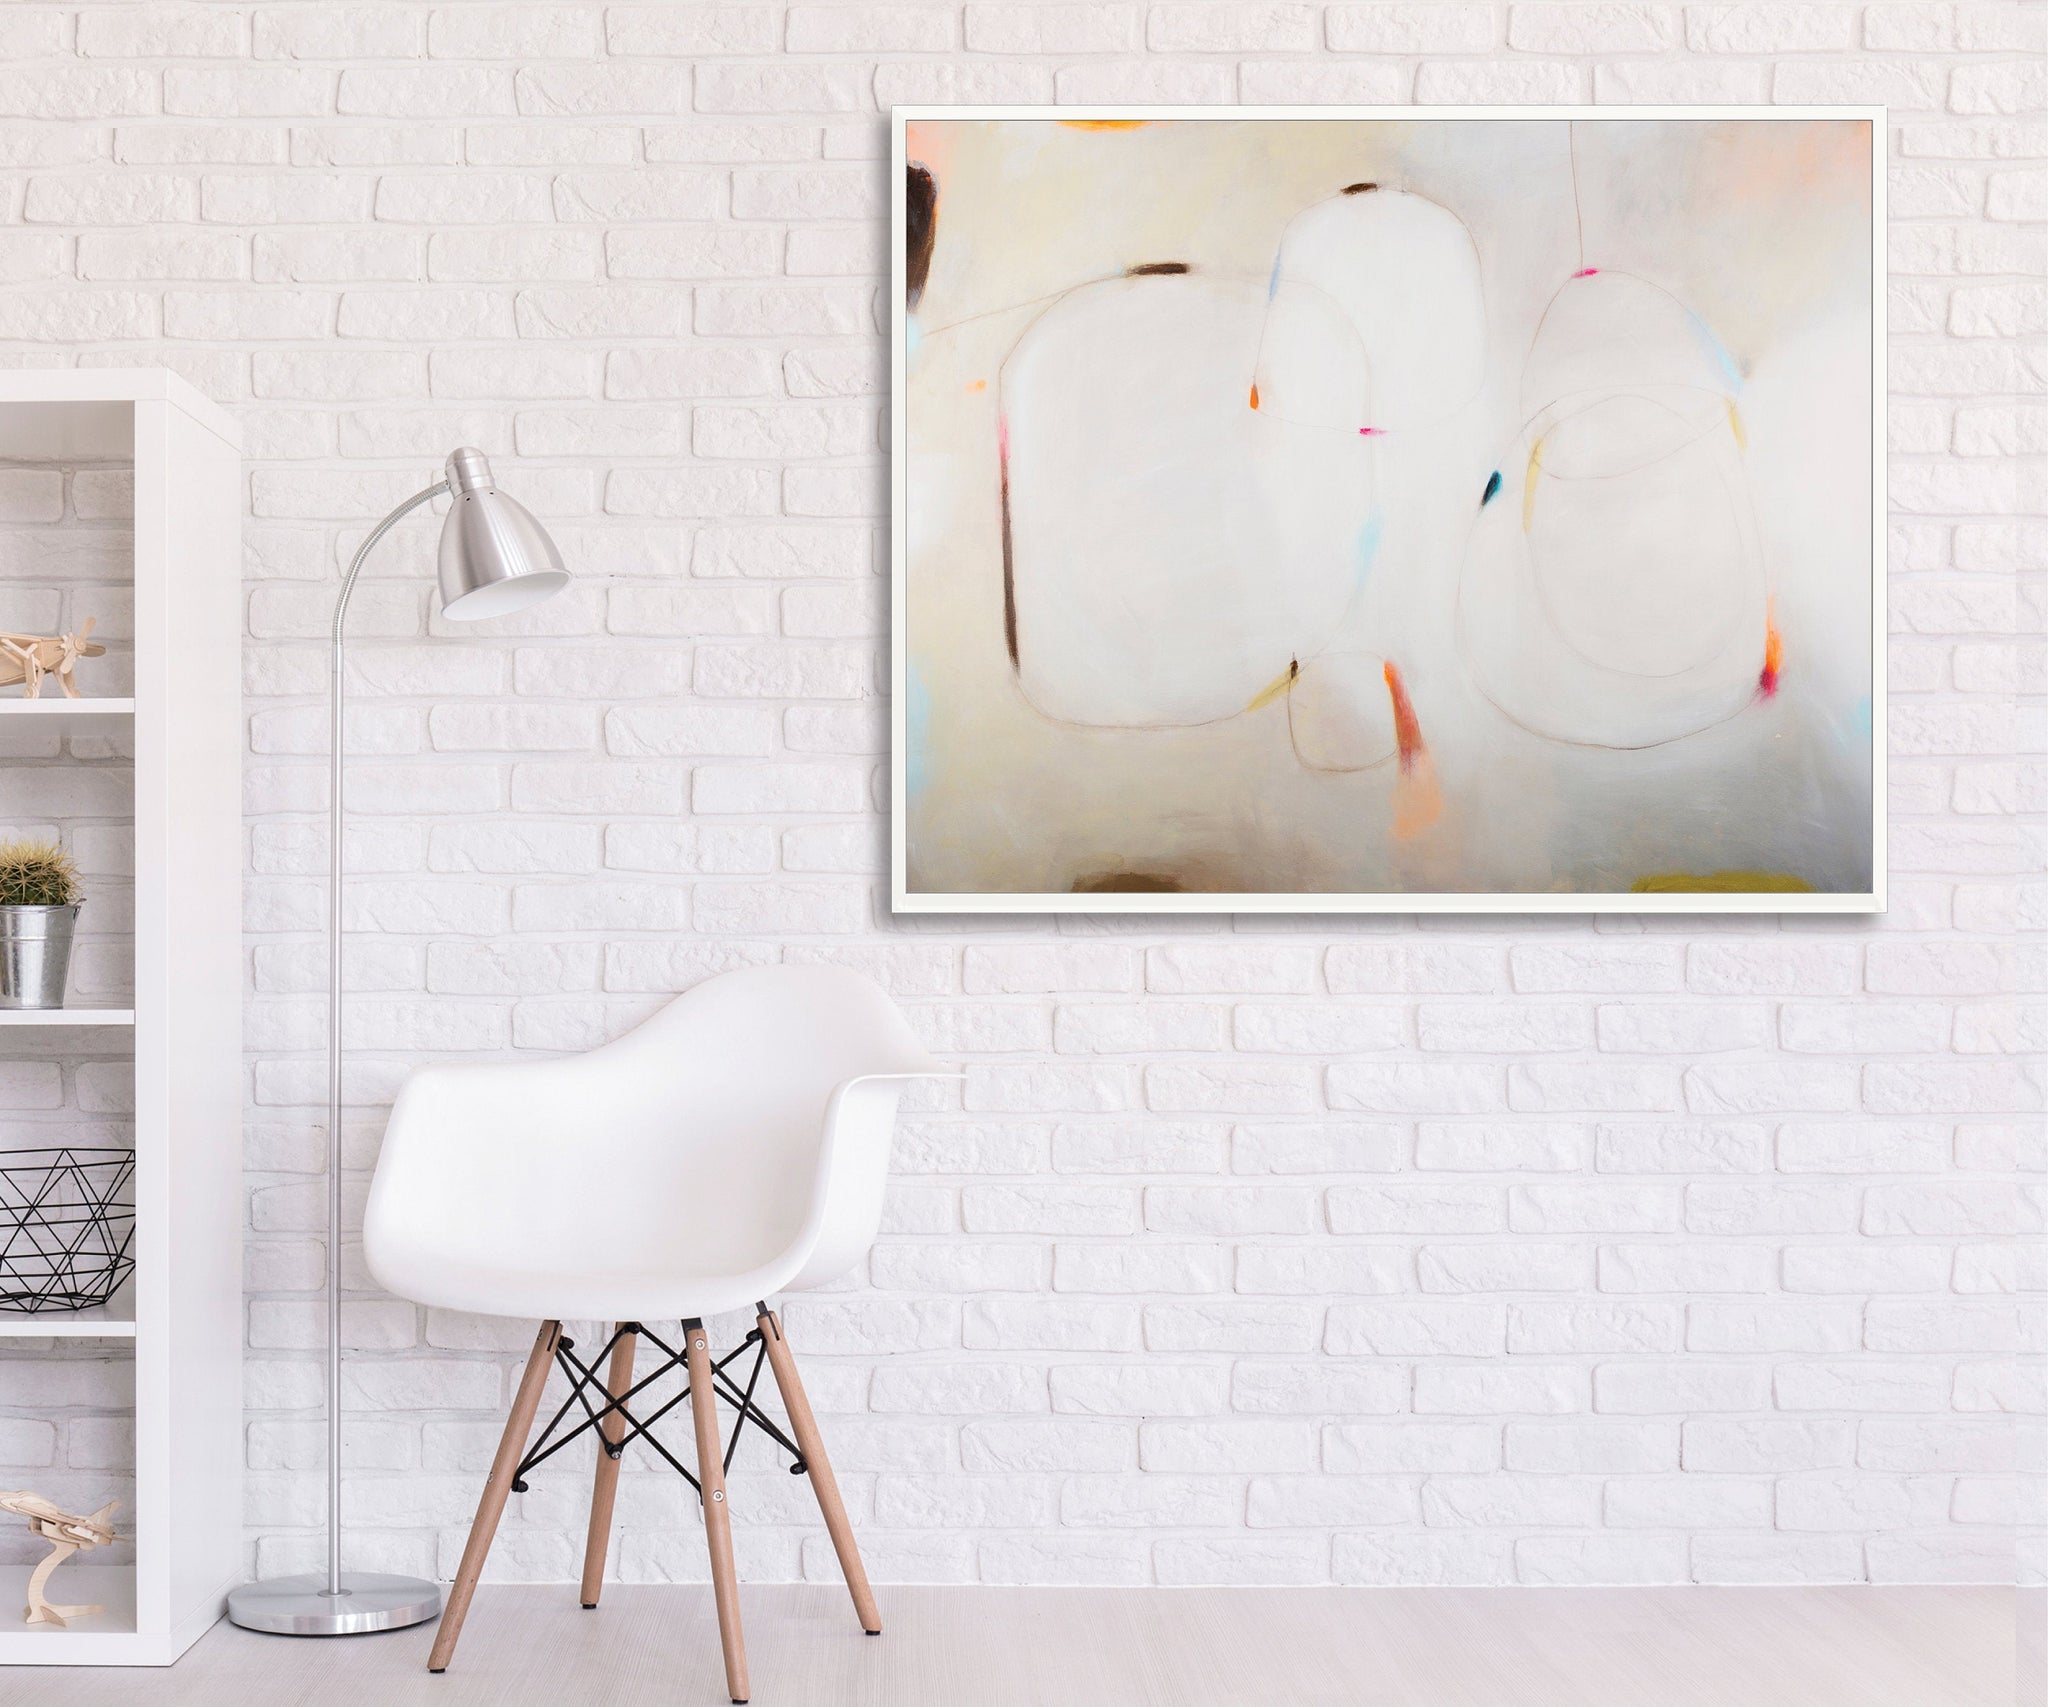 Extra large modern wall art abstract print, Beige minimalist painting print, contemporary print, acrylic abstract painting by Camilo Mattis - camilomattis.com